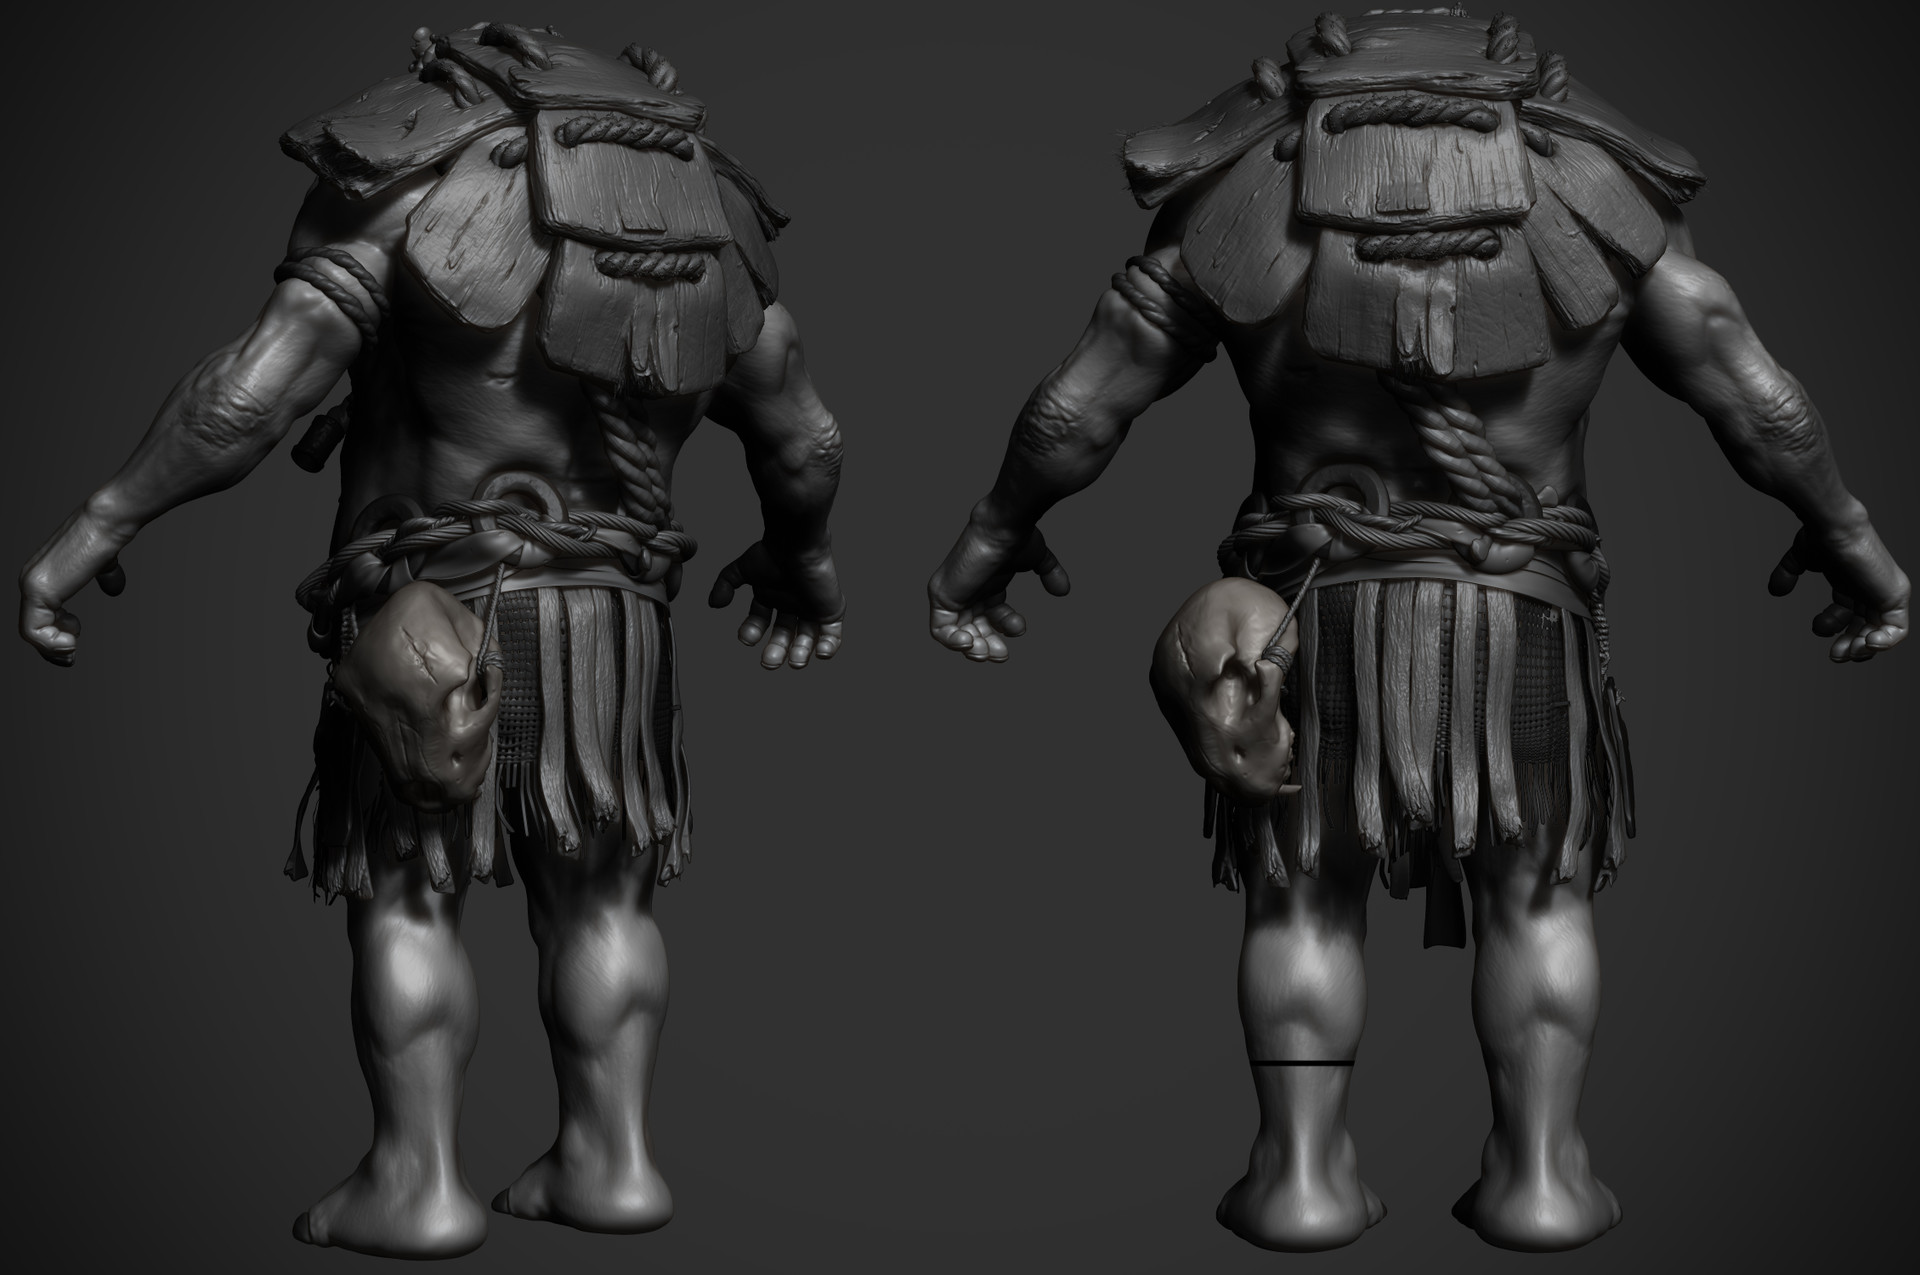 omar-chaouch-hippo-animal-warrior-omar-chaouch-wip-03.jpg